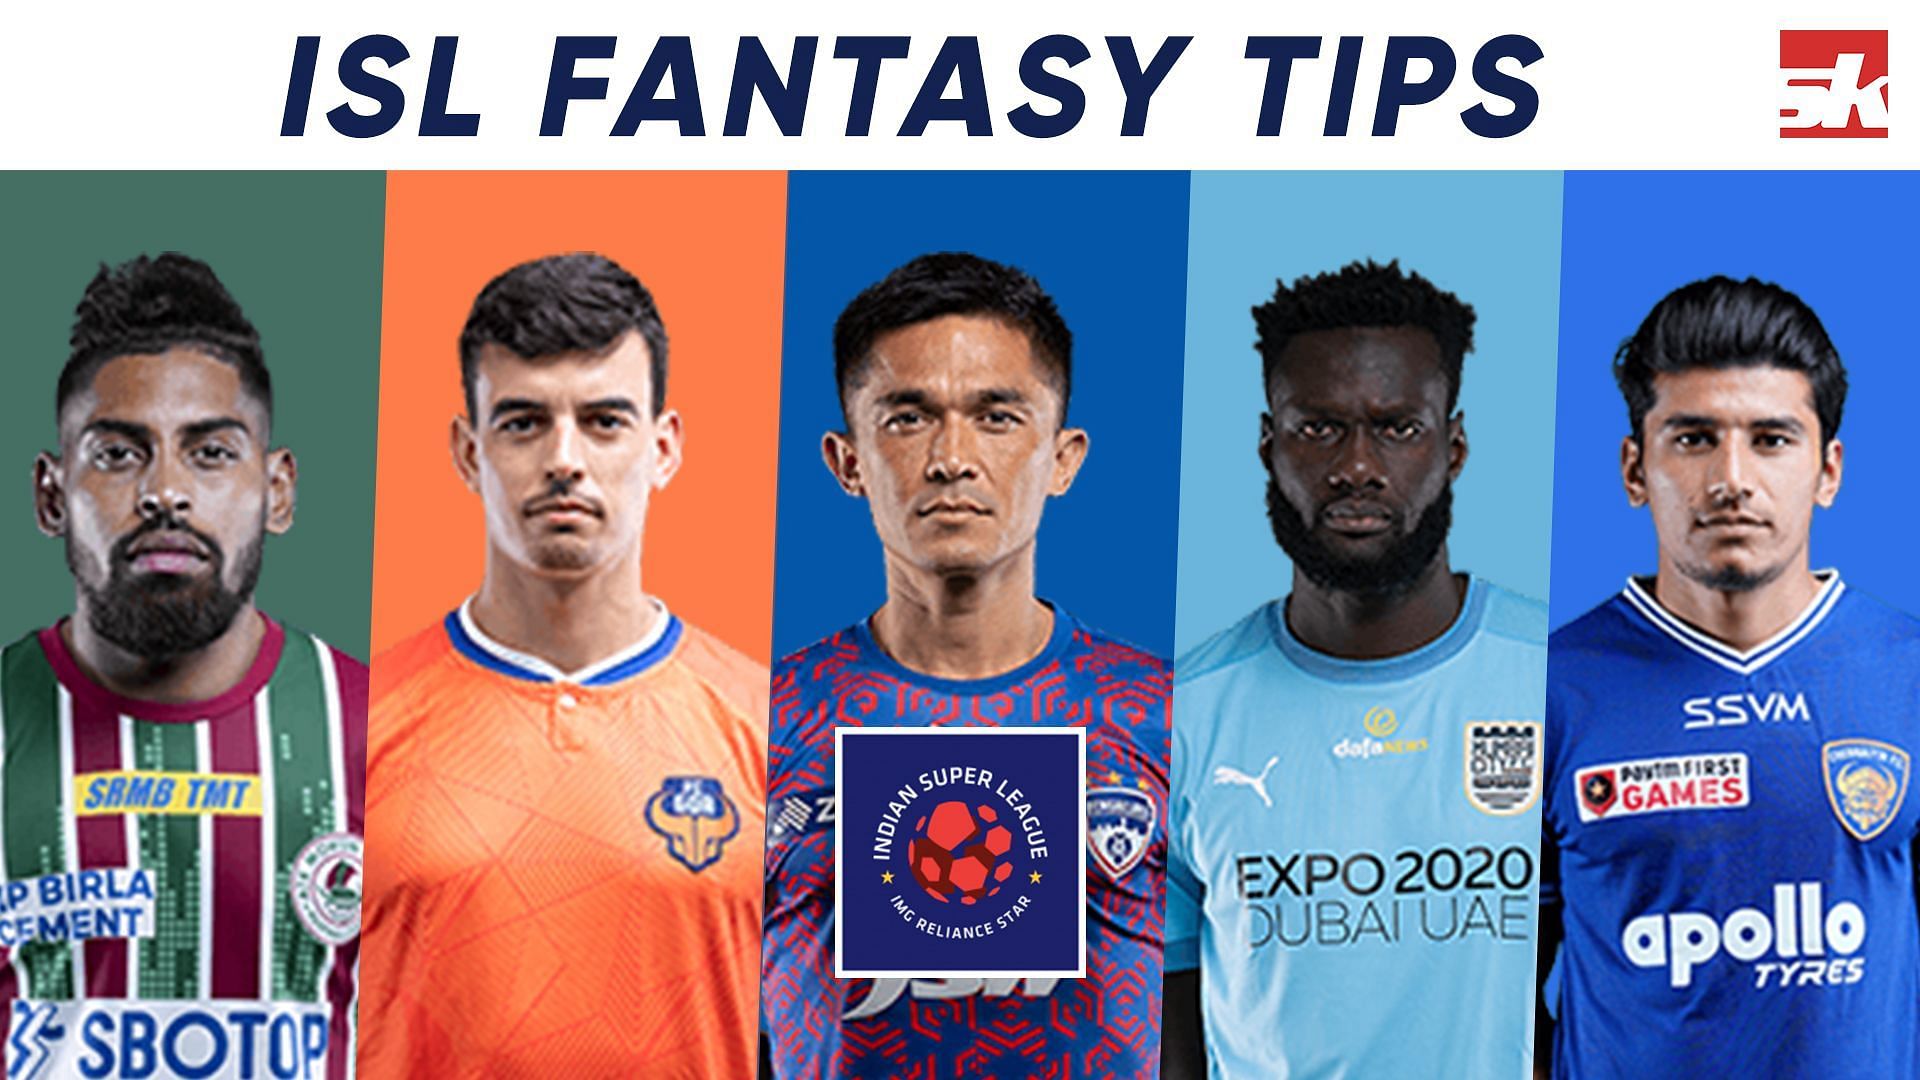 Hyderabad FC vs Kerala Blasters FC Dream11 Prediction, Fantasy Football Tips & Playing 11 Updates for Today's ISL Final match - March 20th, 2022